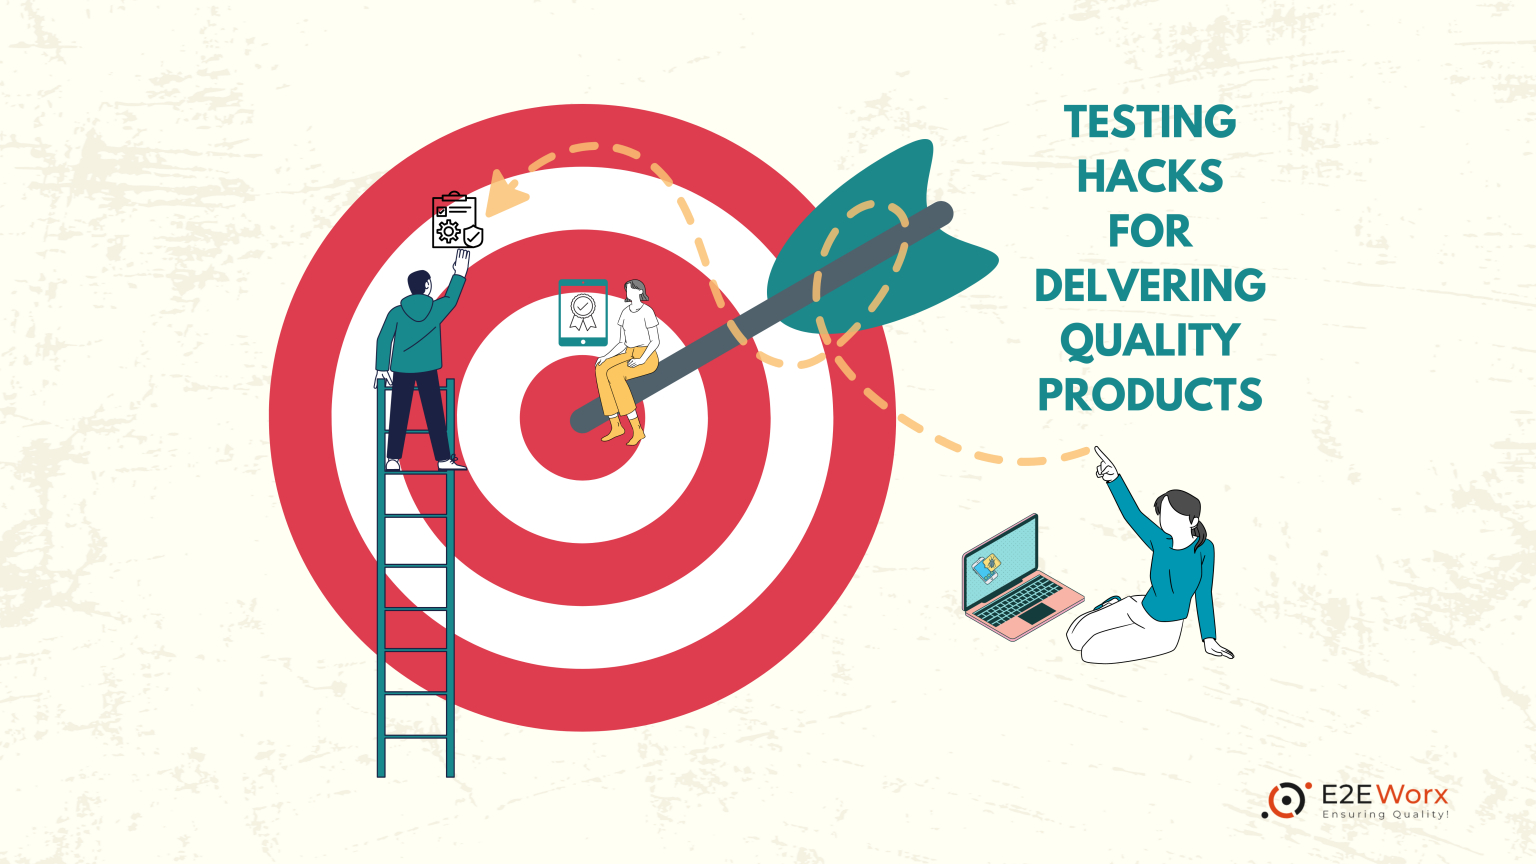 Software Quality Assurance Testing Hacks for Delivering Quality Products - E2EWorx